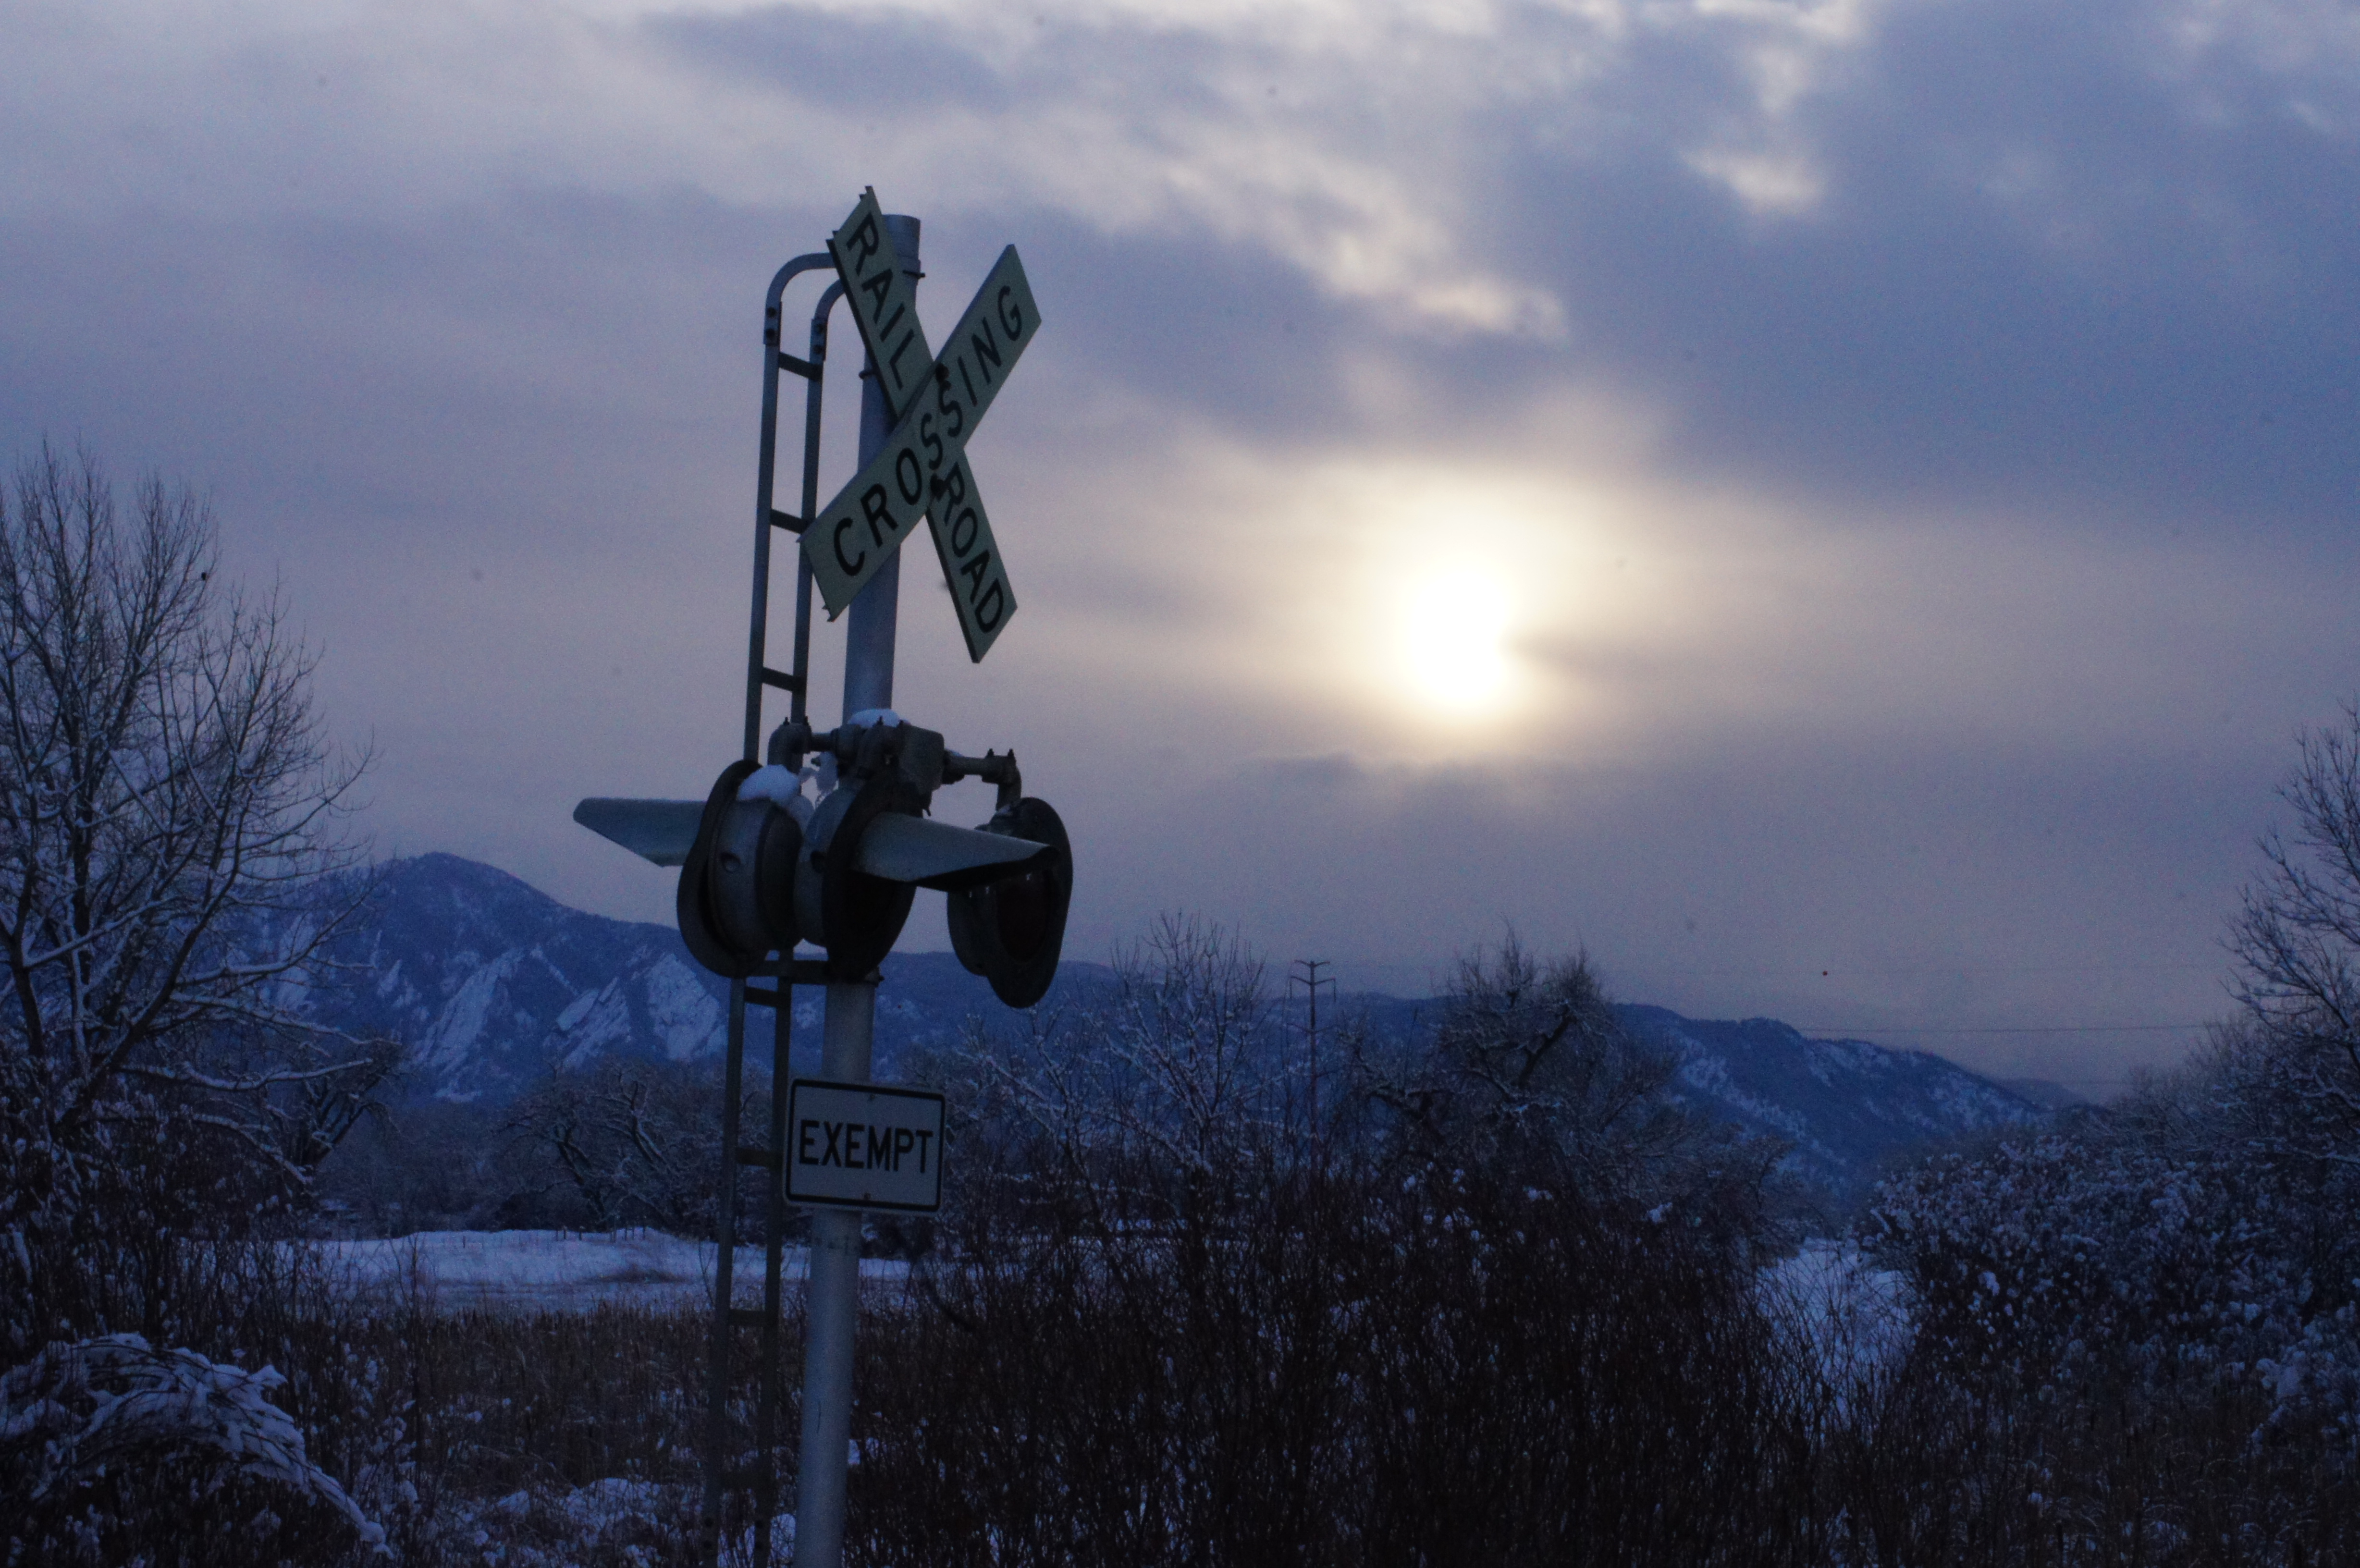 Railroad Crossing with Flatirons in Distance